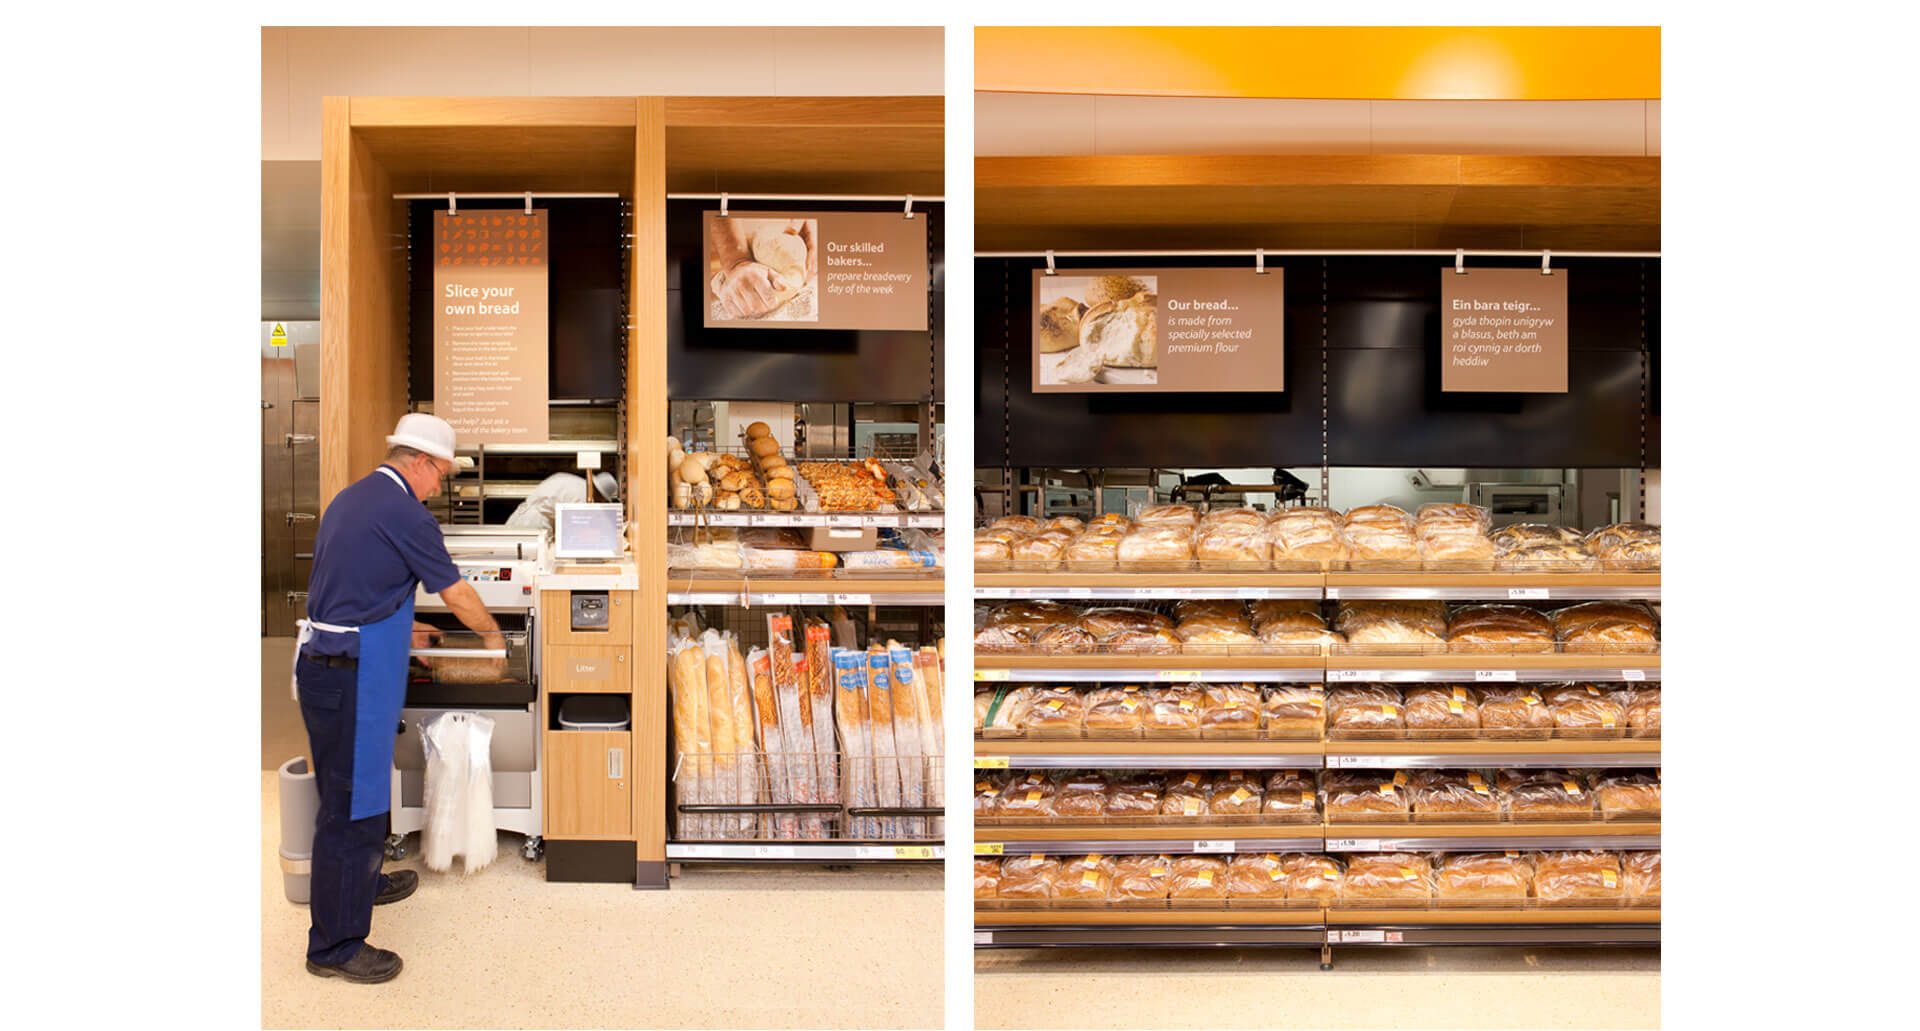 Tesco supermarket welshpool bakery merchandising system and graphic communication suite